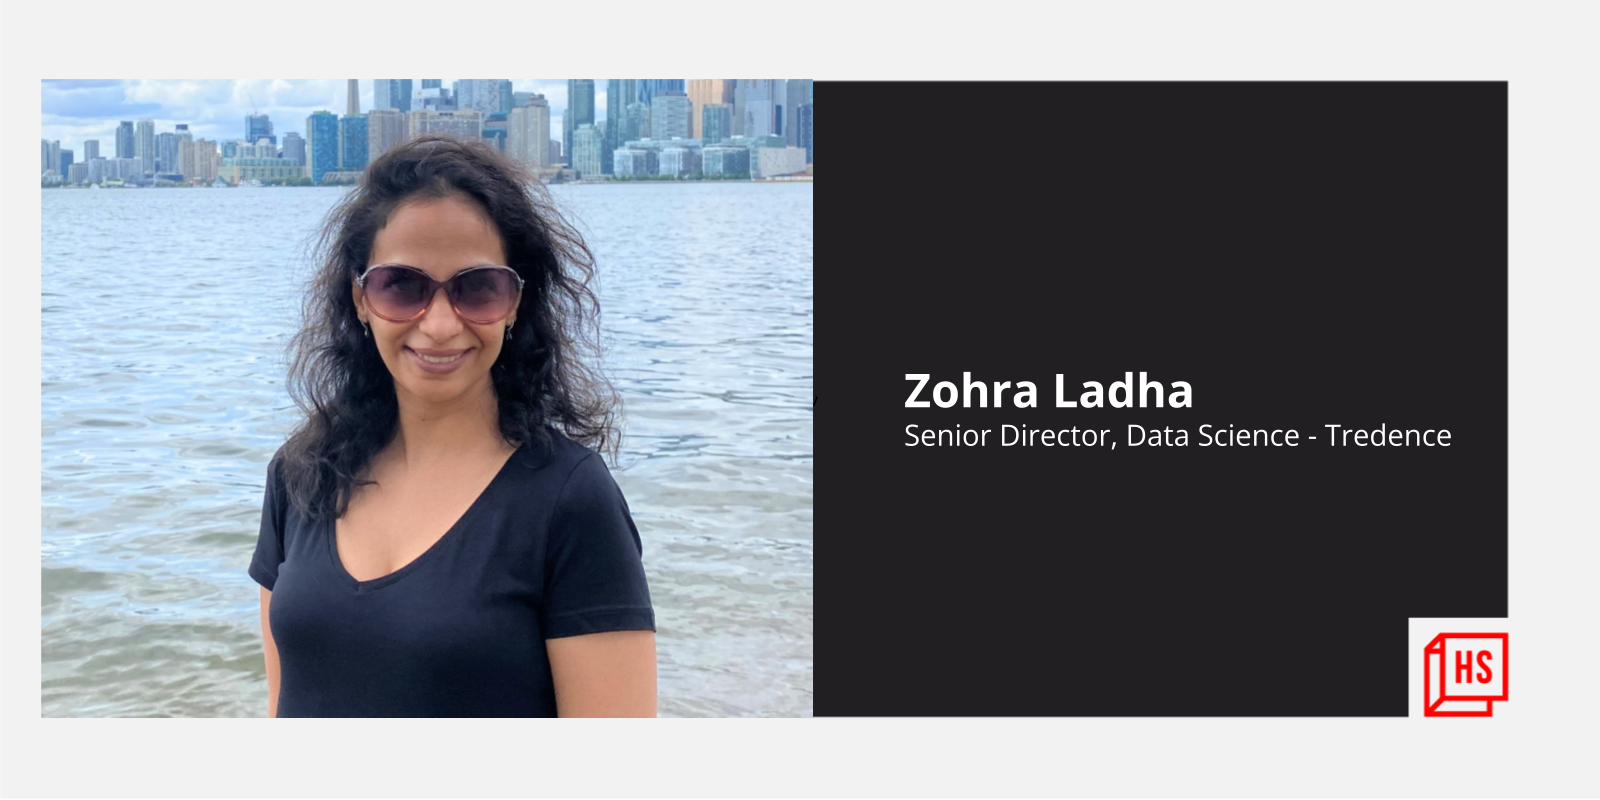 [Women in Tech] It is critical to begin early, to educate and train women, says Zohra Ladha of Tredence

